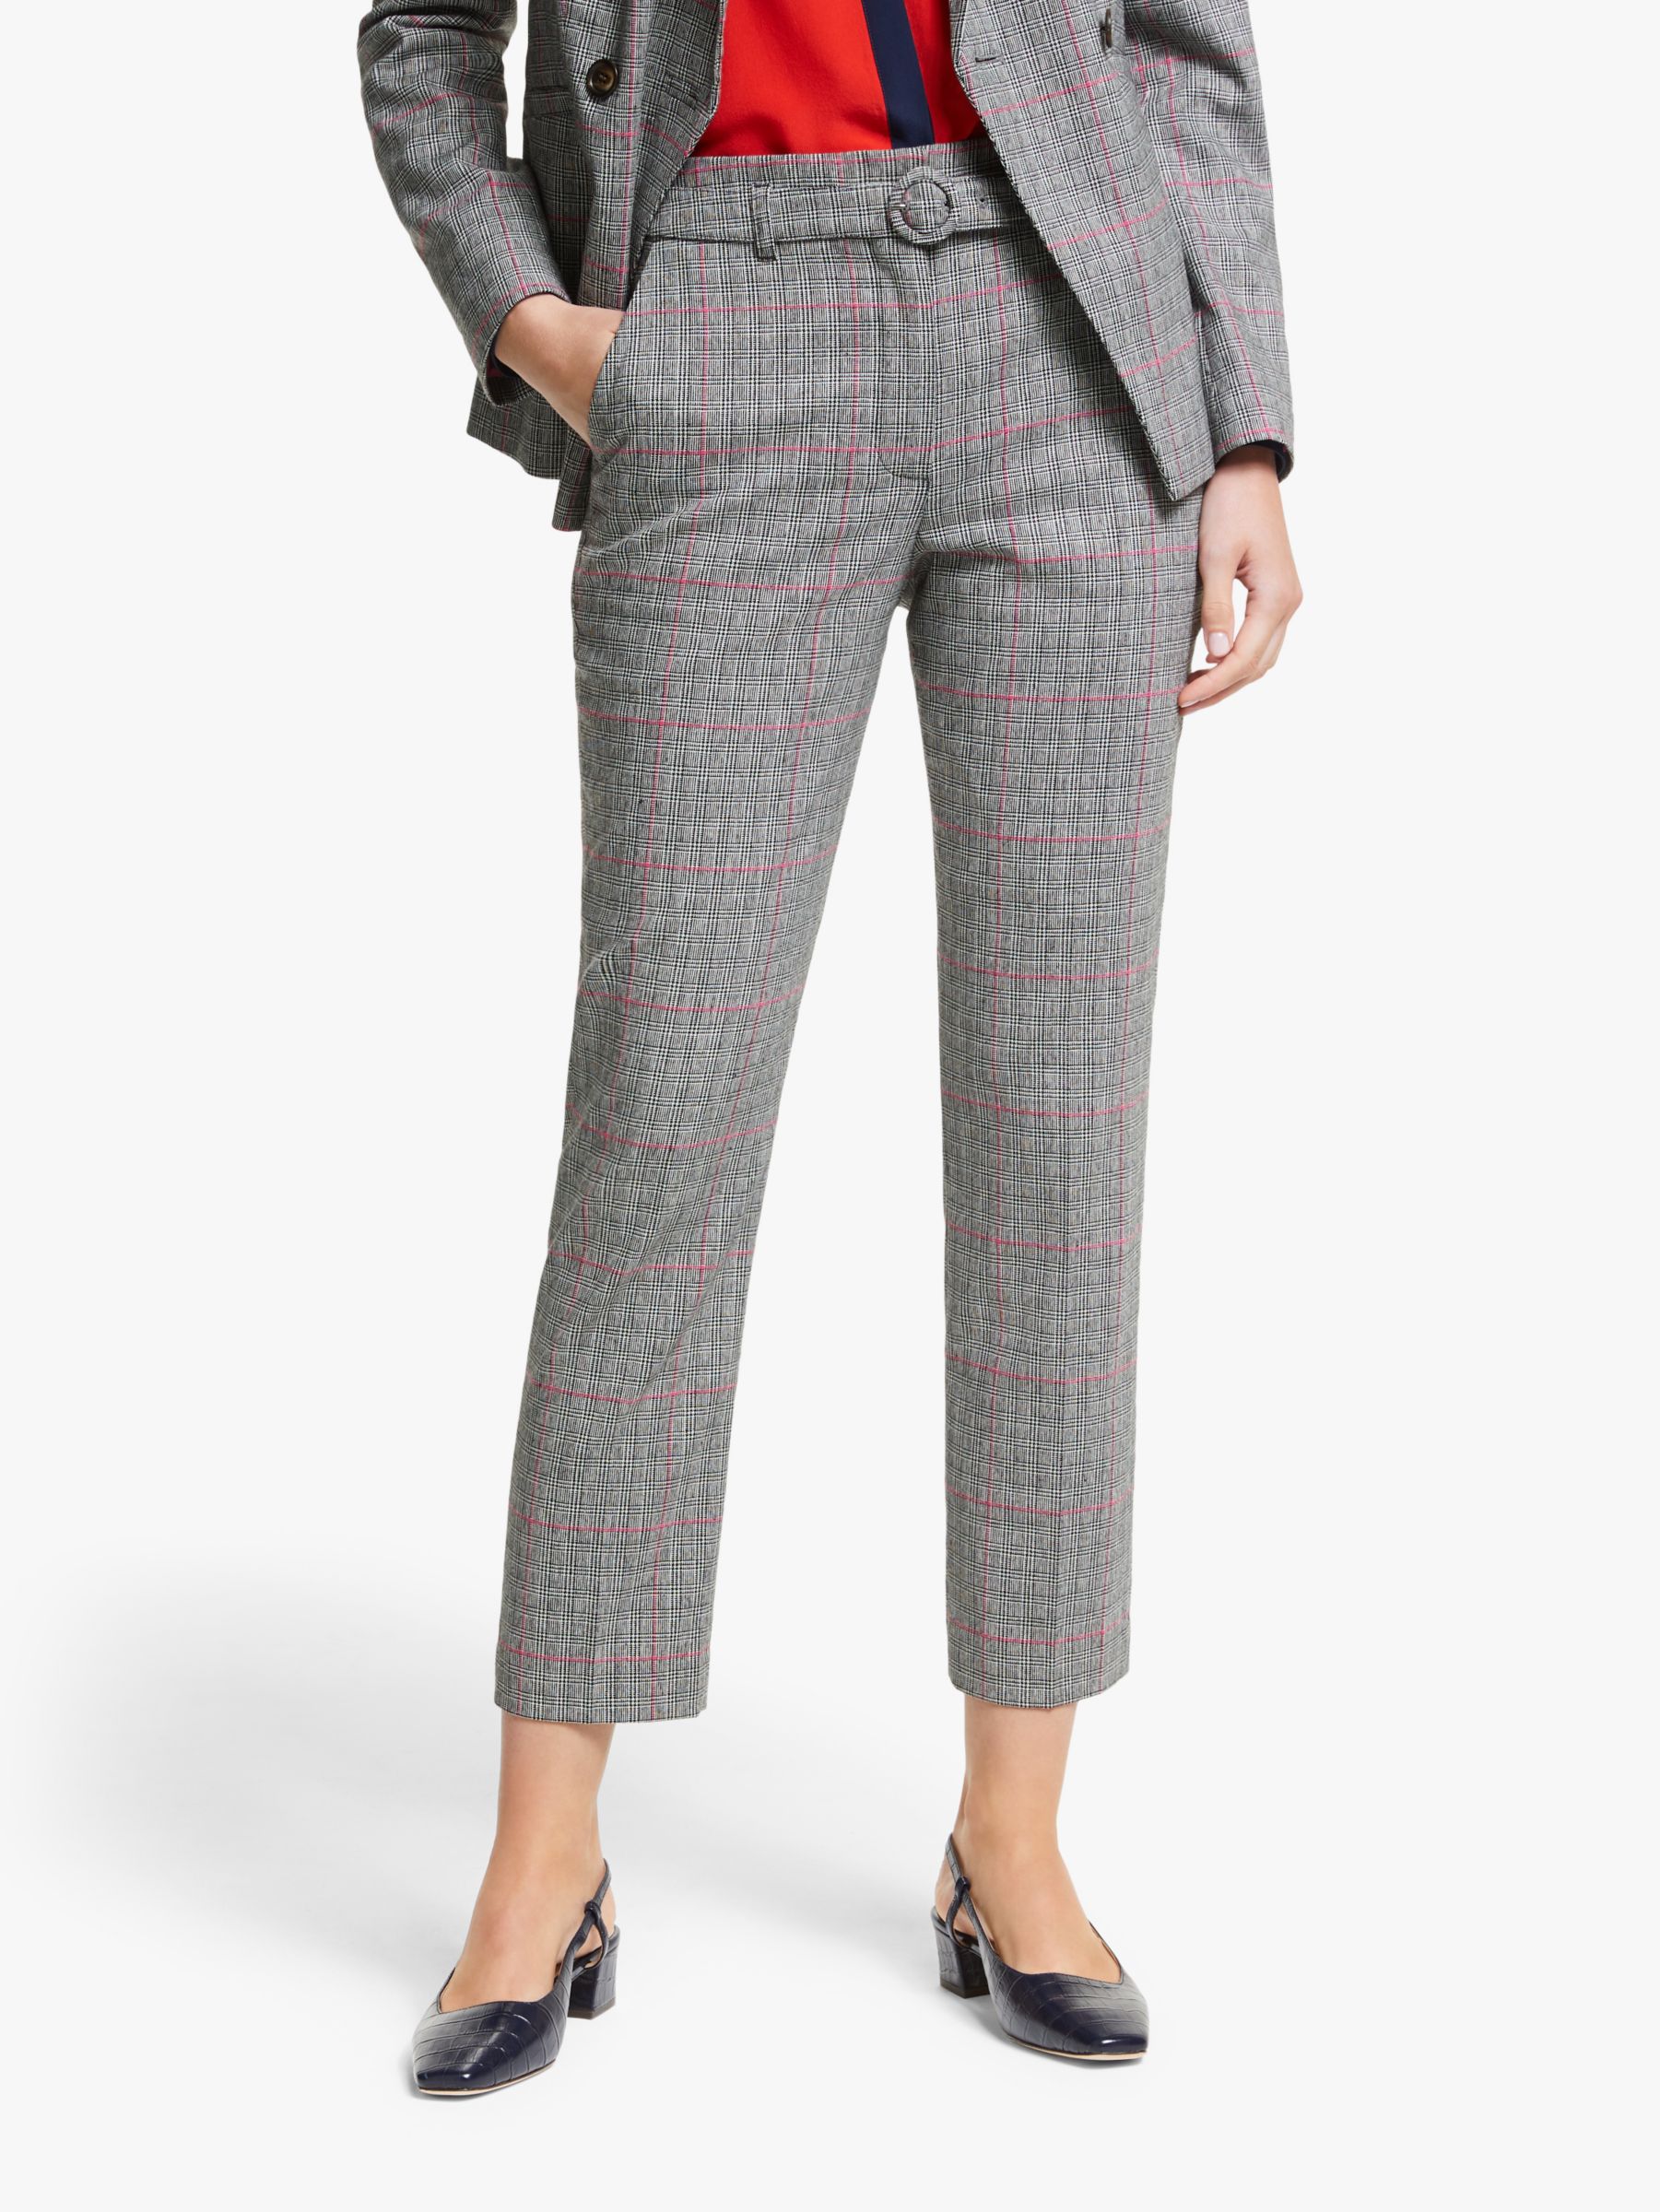 Boden Malden Tweed Belted Trousers